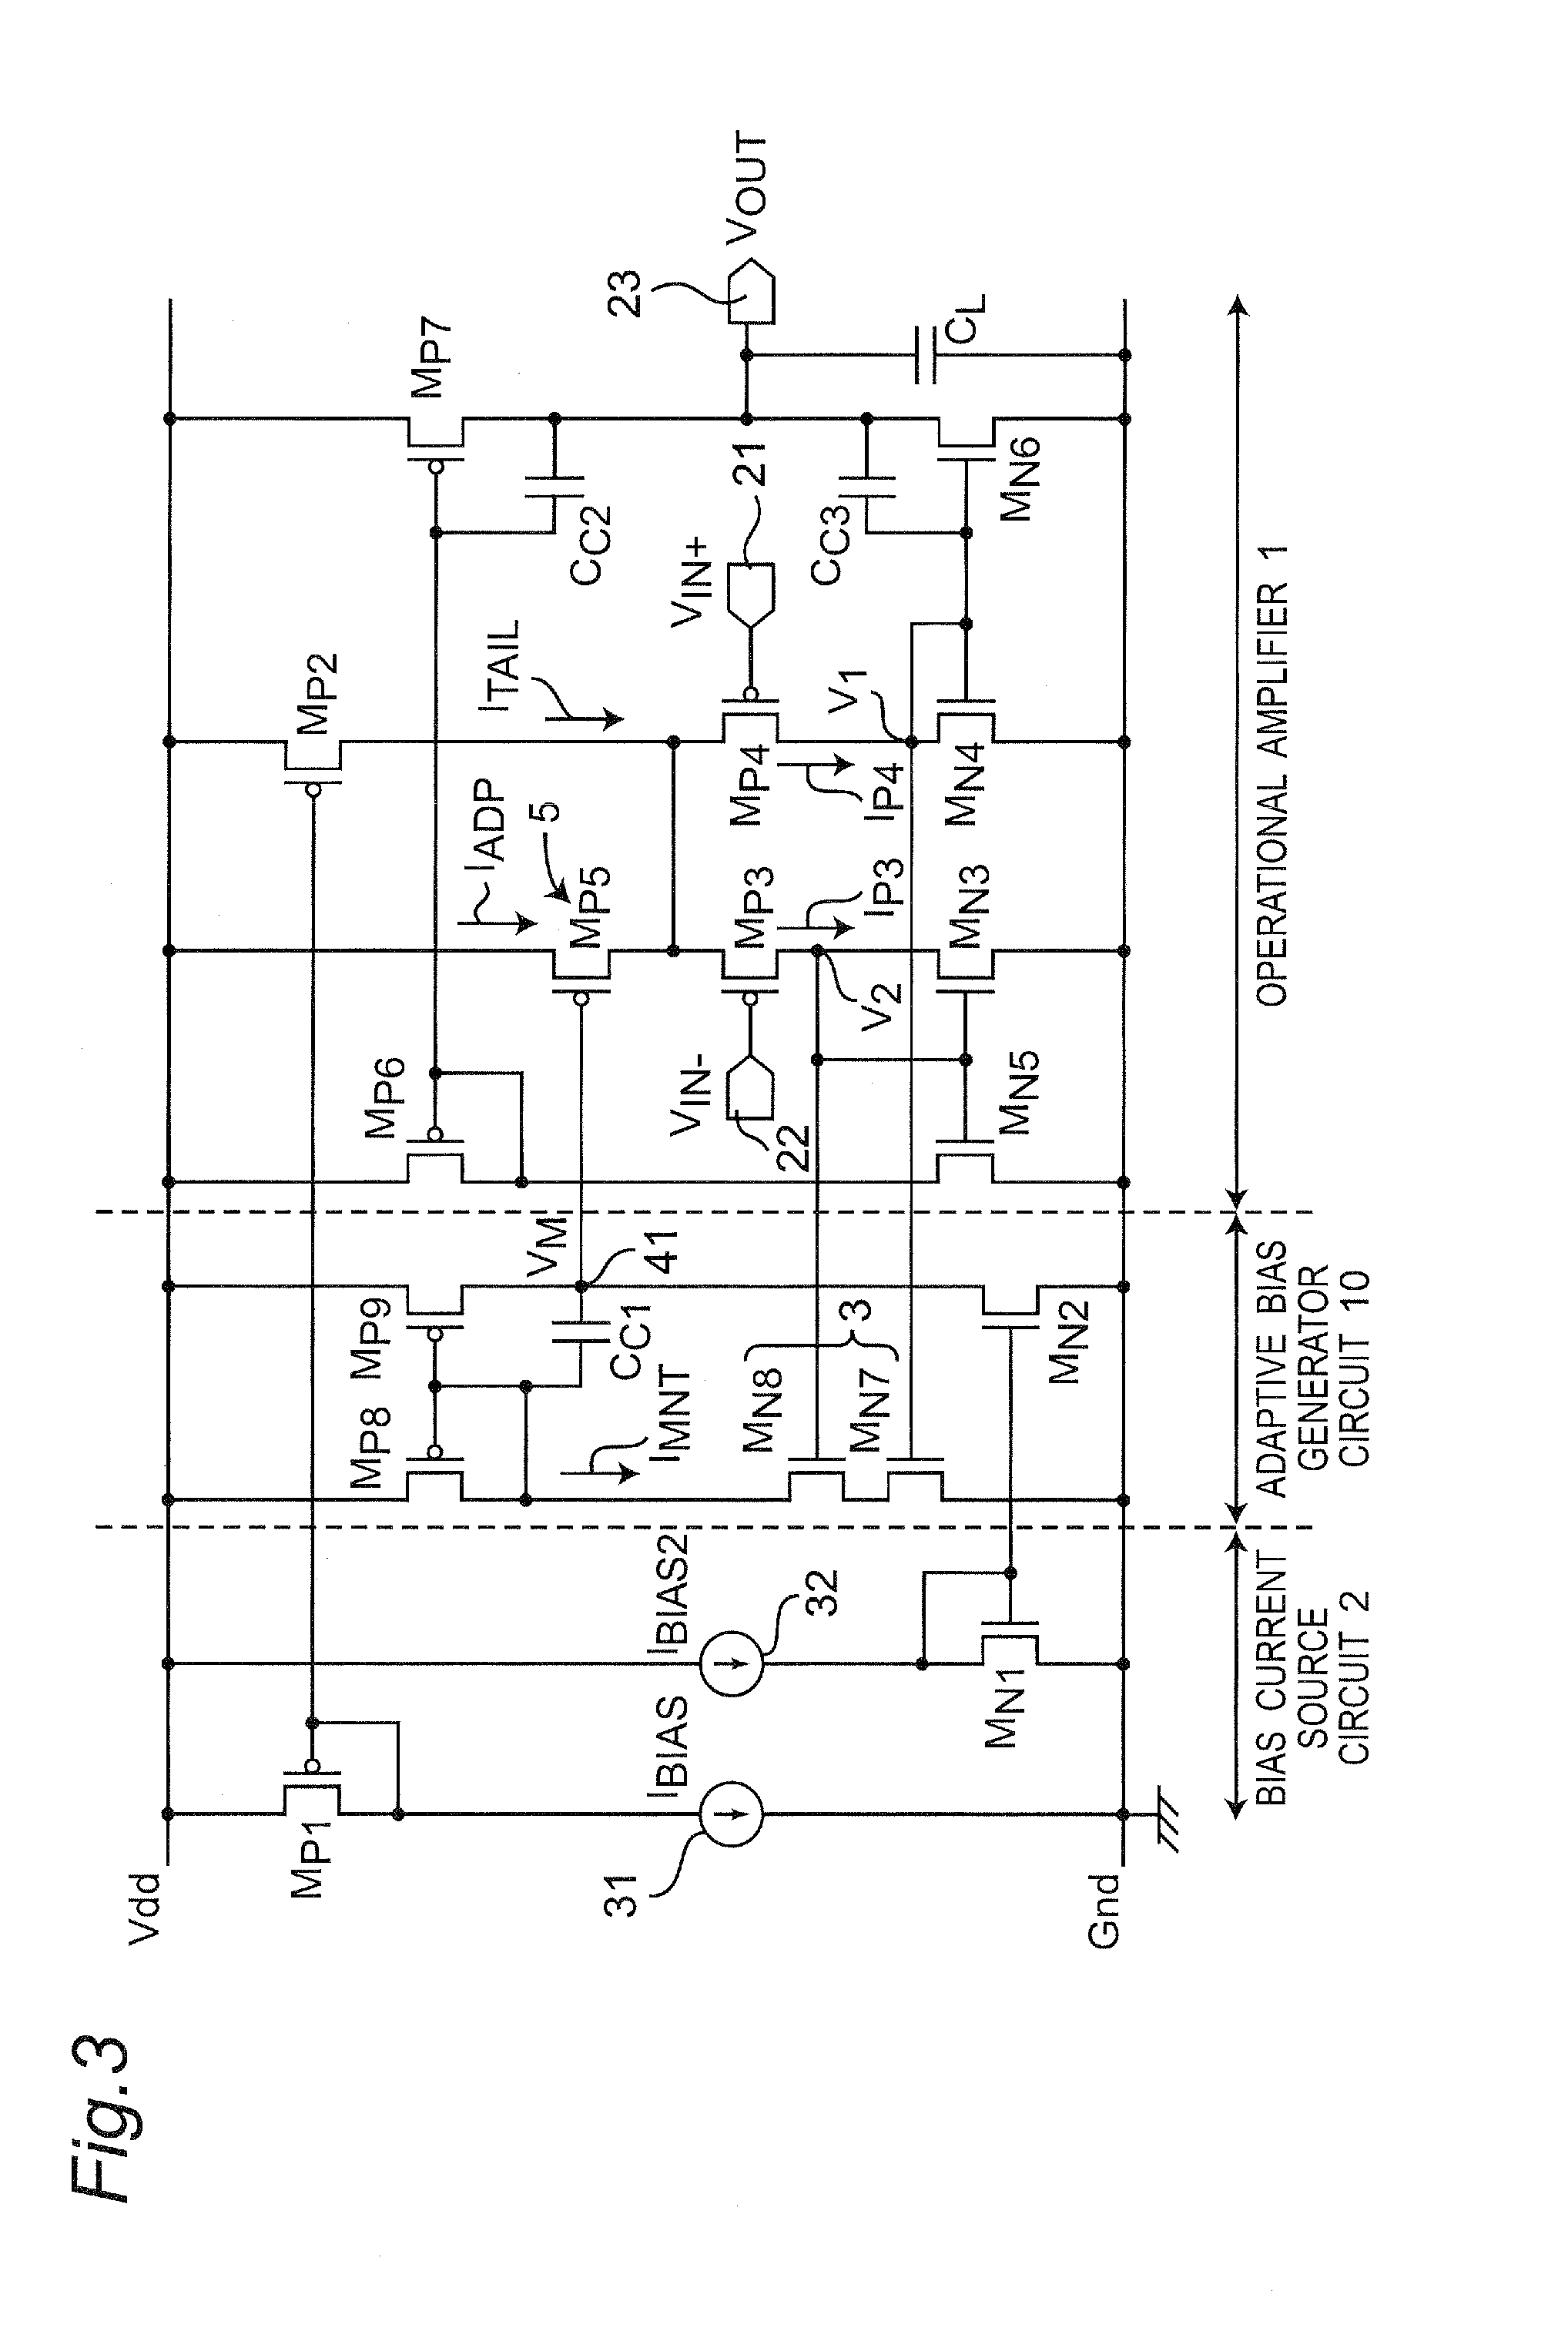 Differential amplifier circuit with ultralow power consumption provided with adaptive bias current generator circuit